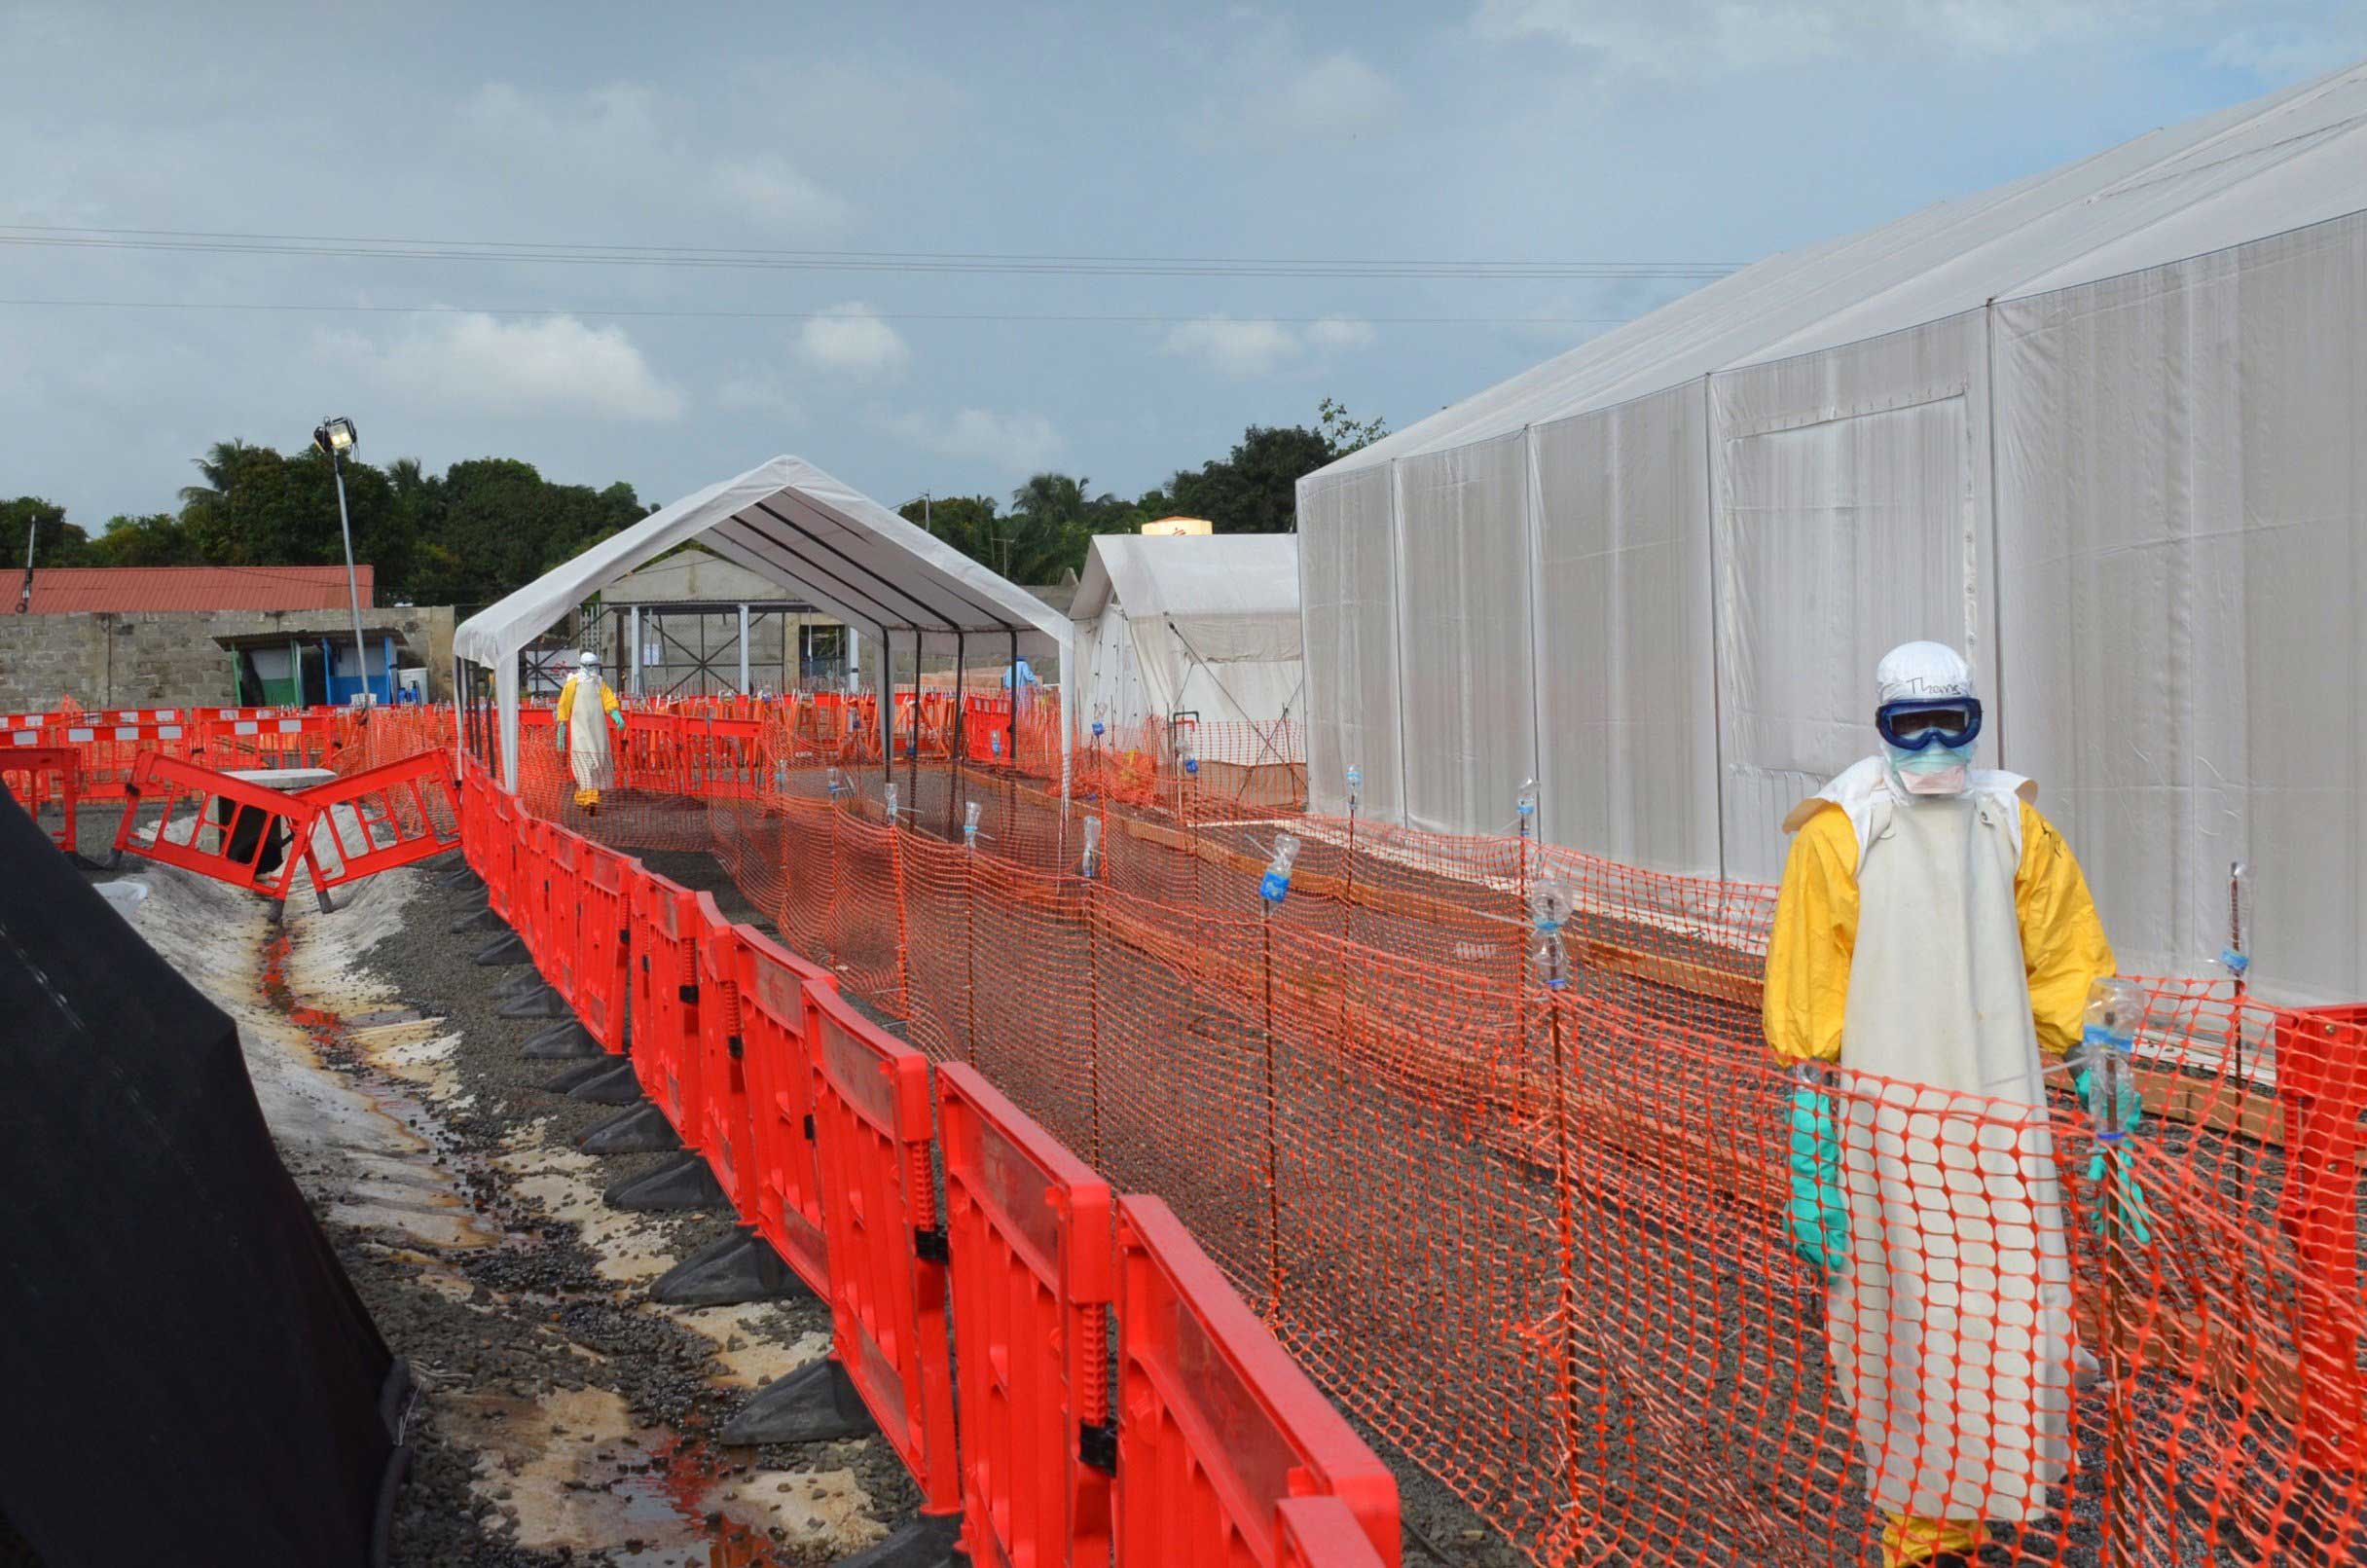 Health workers wearing Personal Protective Equipments (PPE) stand outside an Ebola treatment center run by Medecins Sans Frontieres (Doctors without Borders -- MSF) in Monrovia, Liberia on Oct. 27, 2014. (Zoom Dosso—AFP/Getty Images)